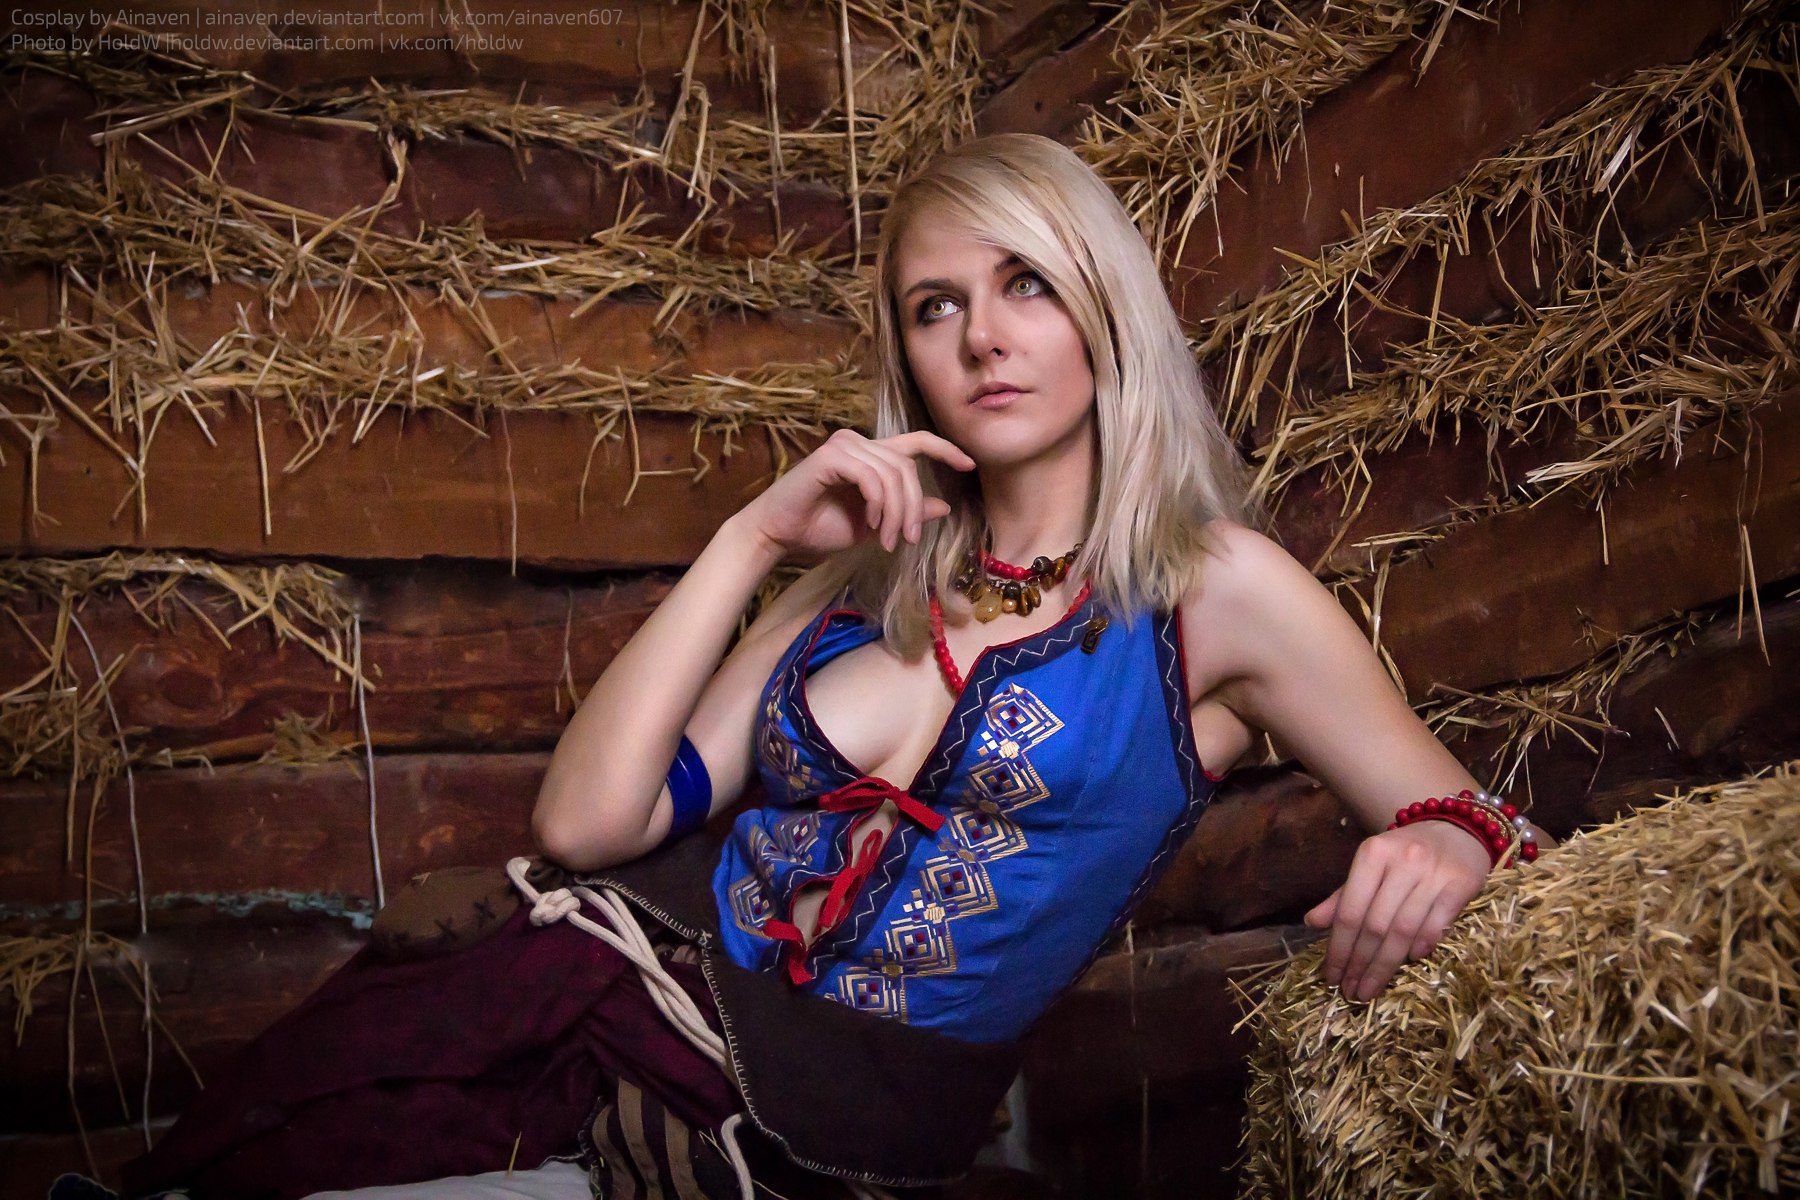 Keira Metz from The Witcher 3 - Daily Cosplay .com